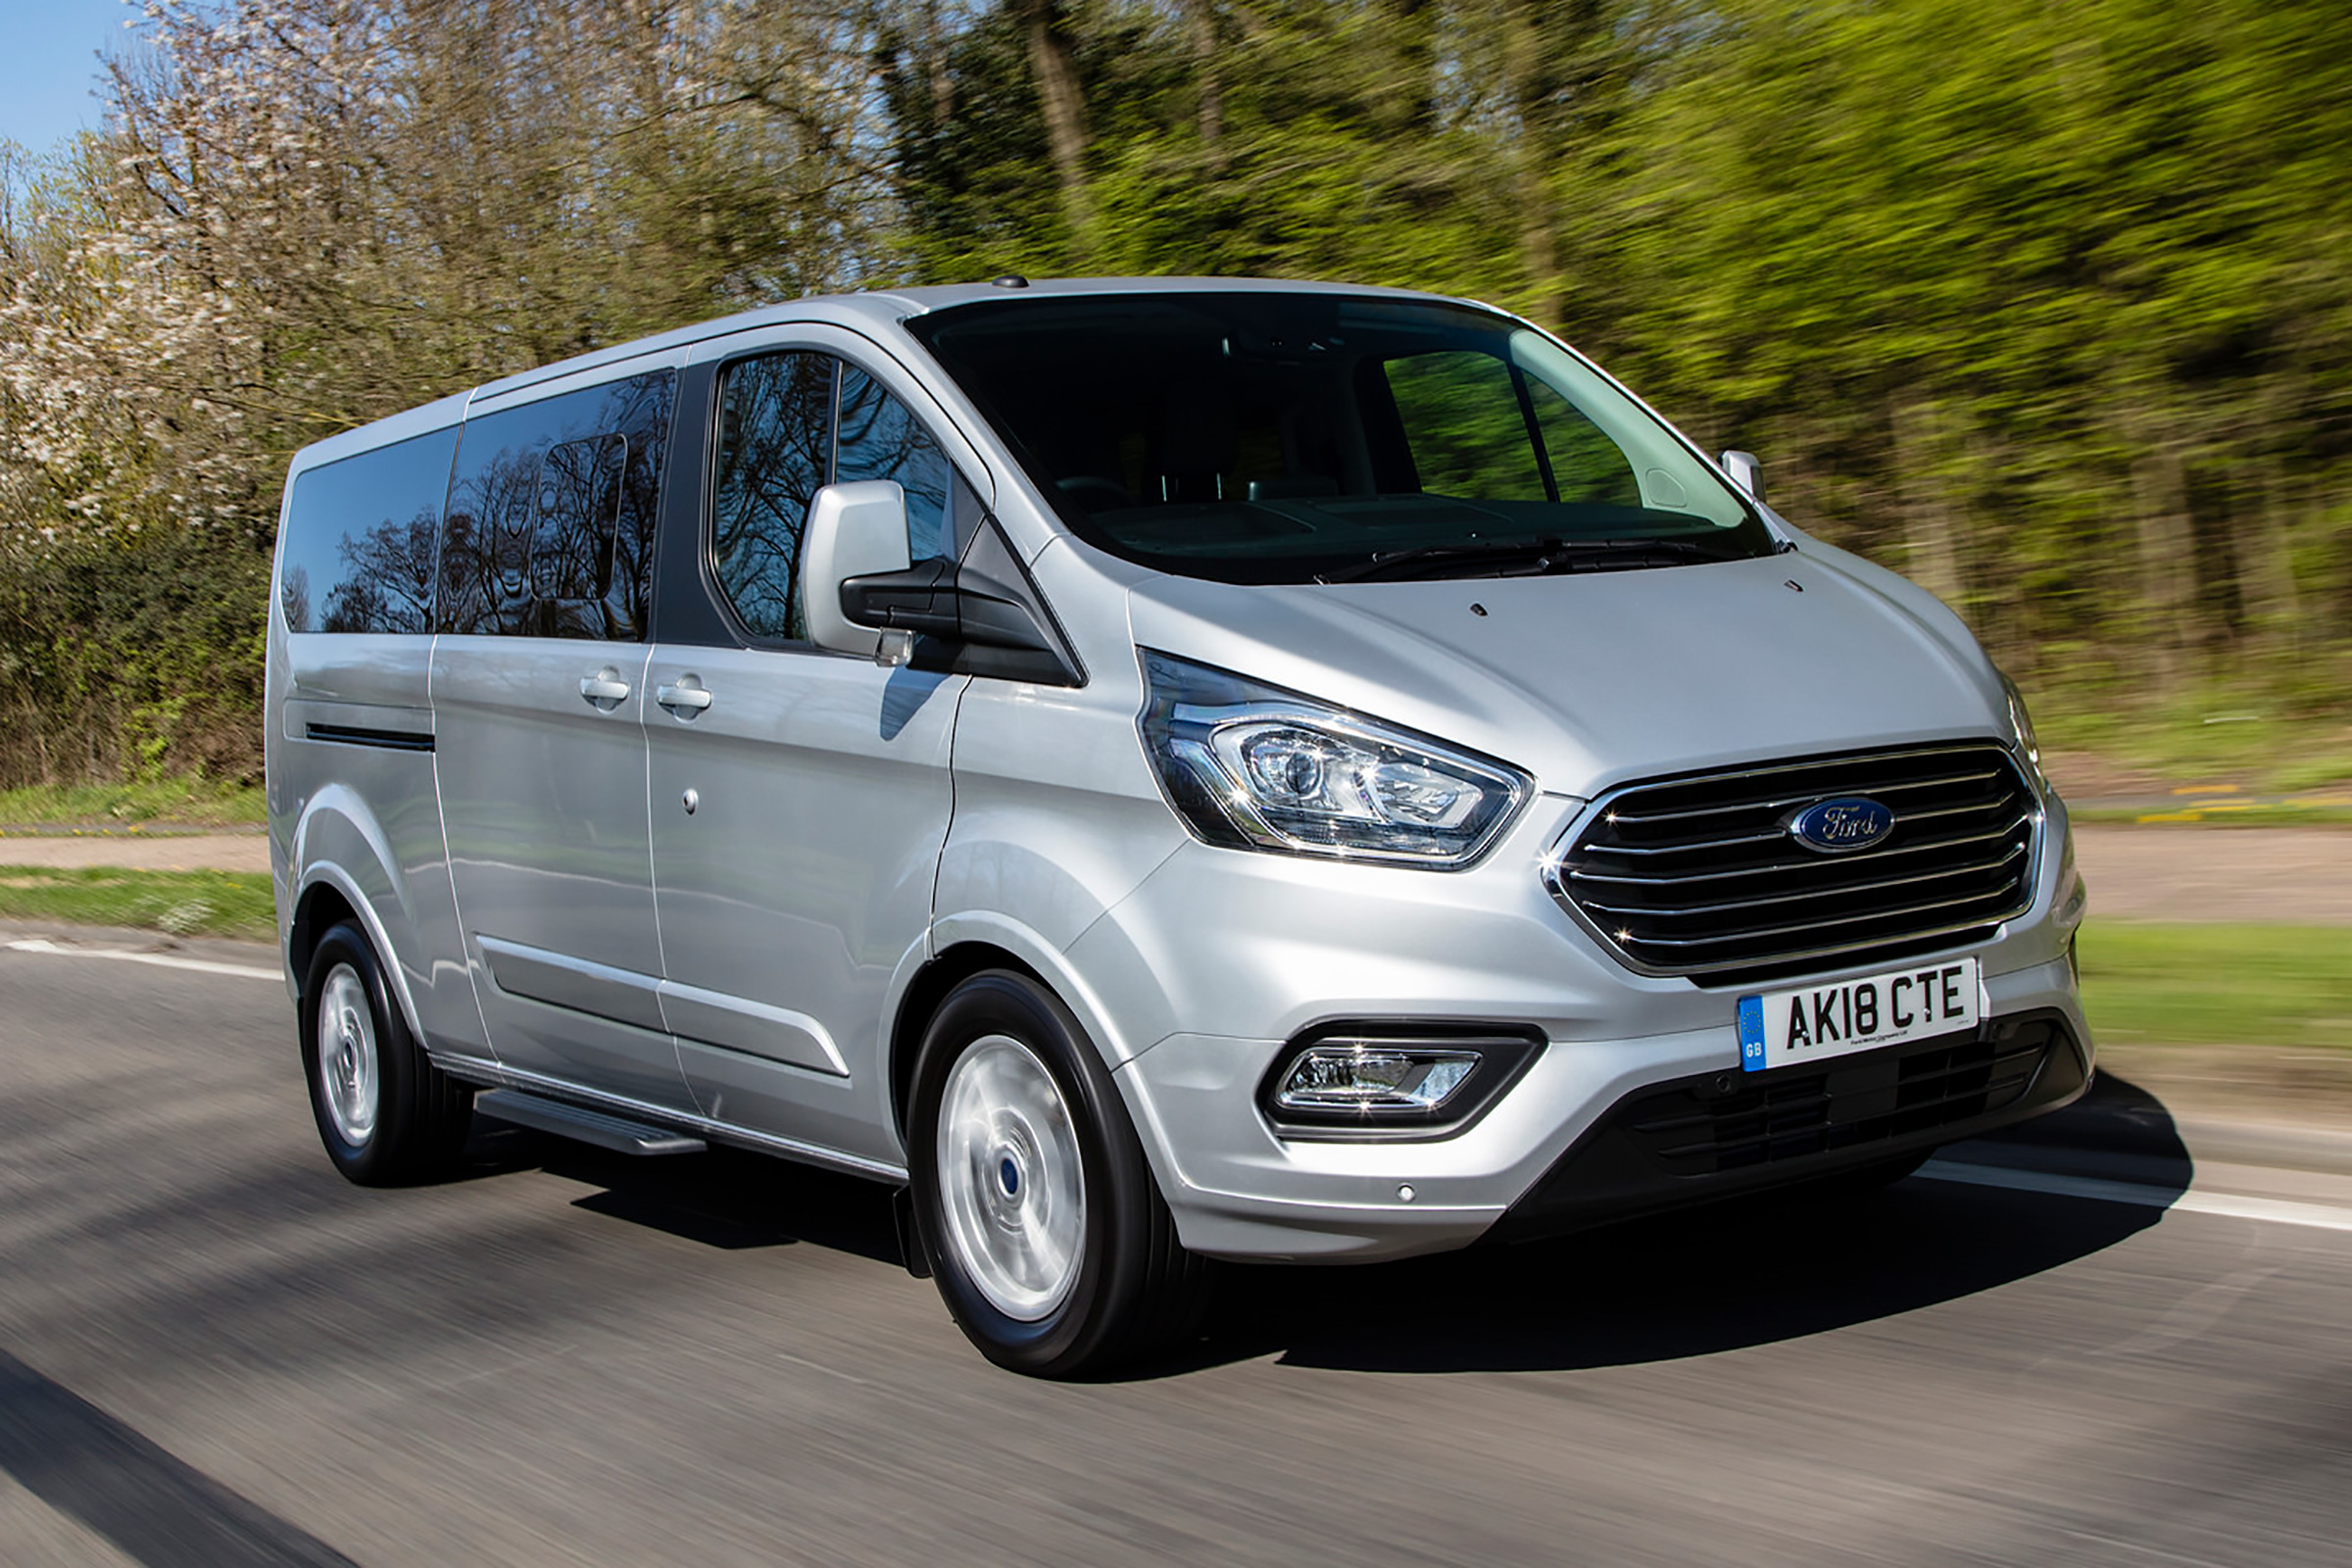 Updated Ford Tourneo Custom on the way with new diesel